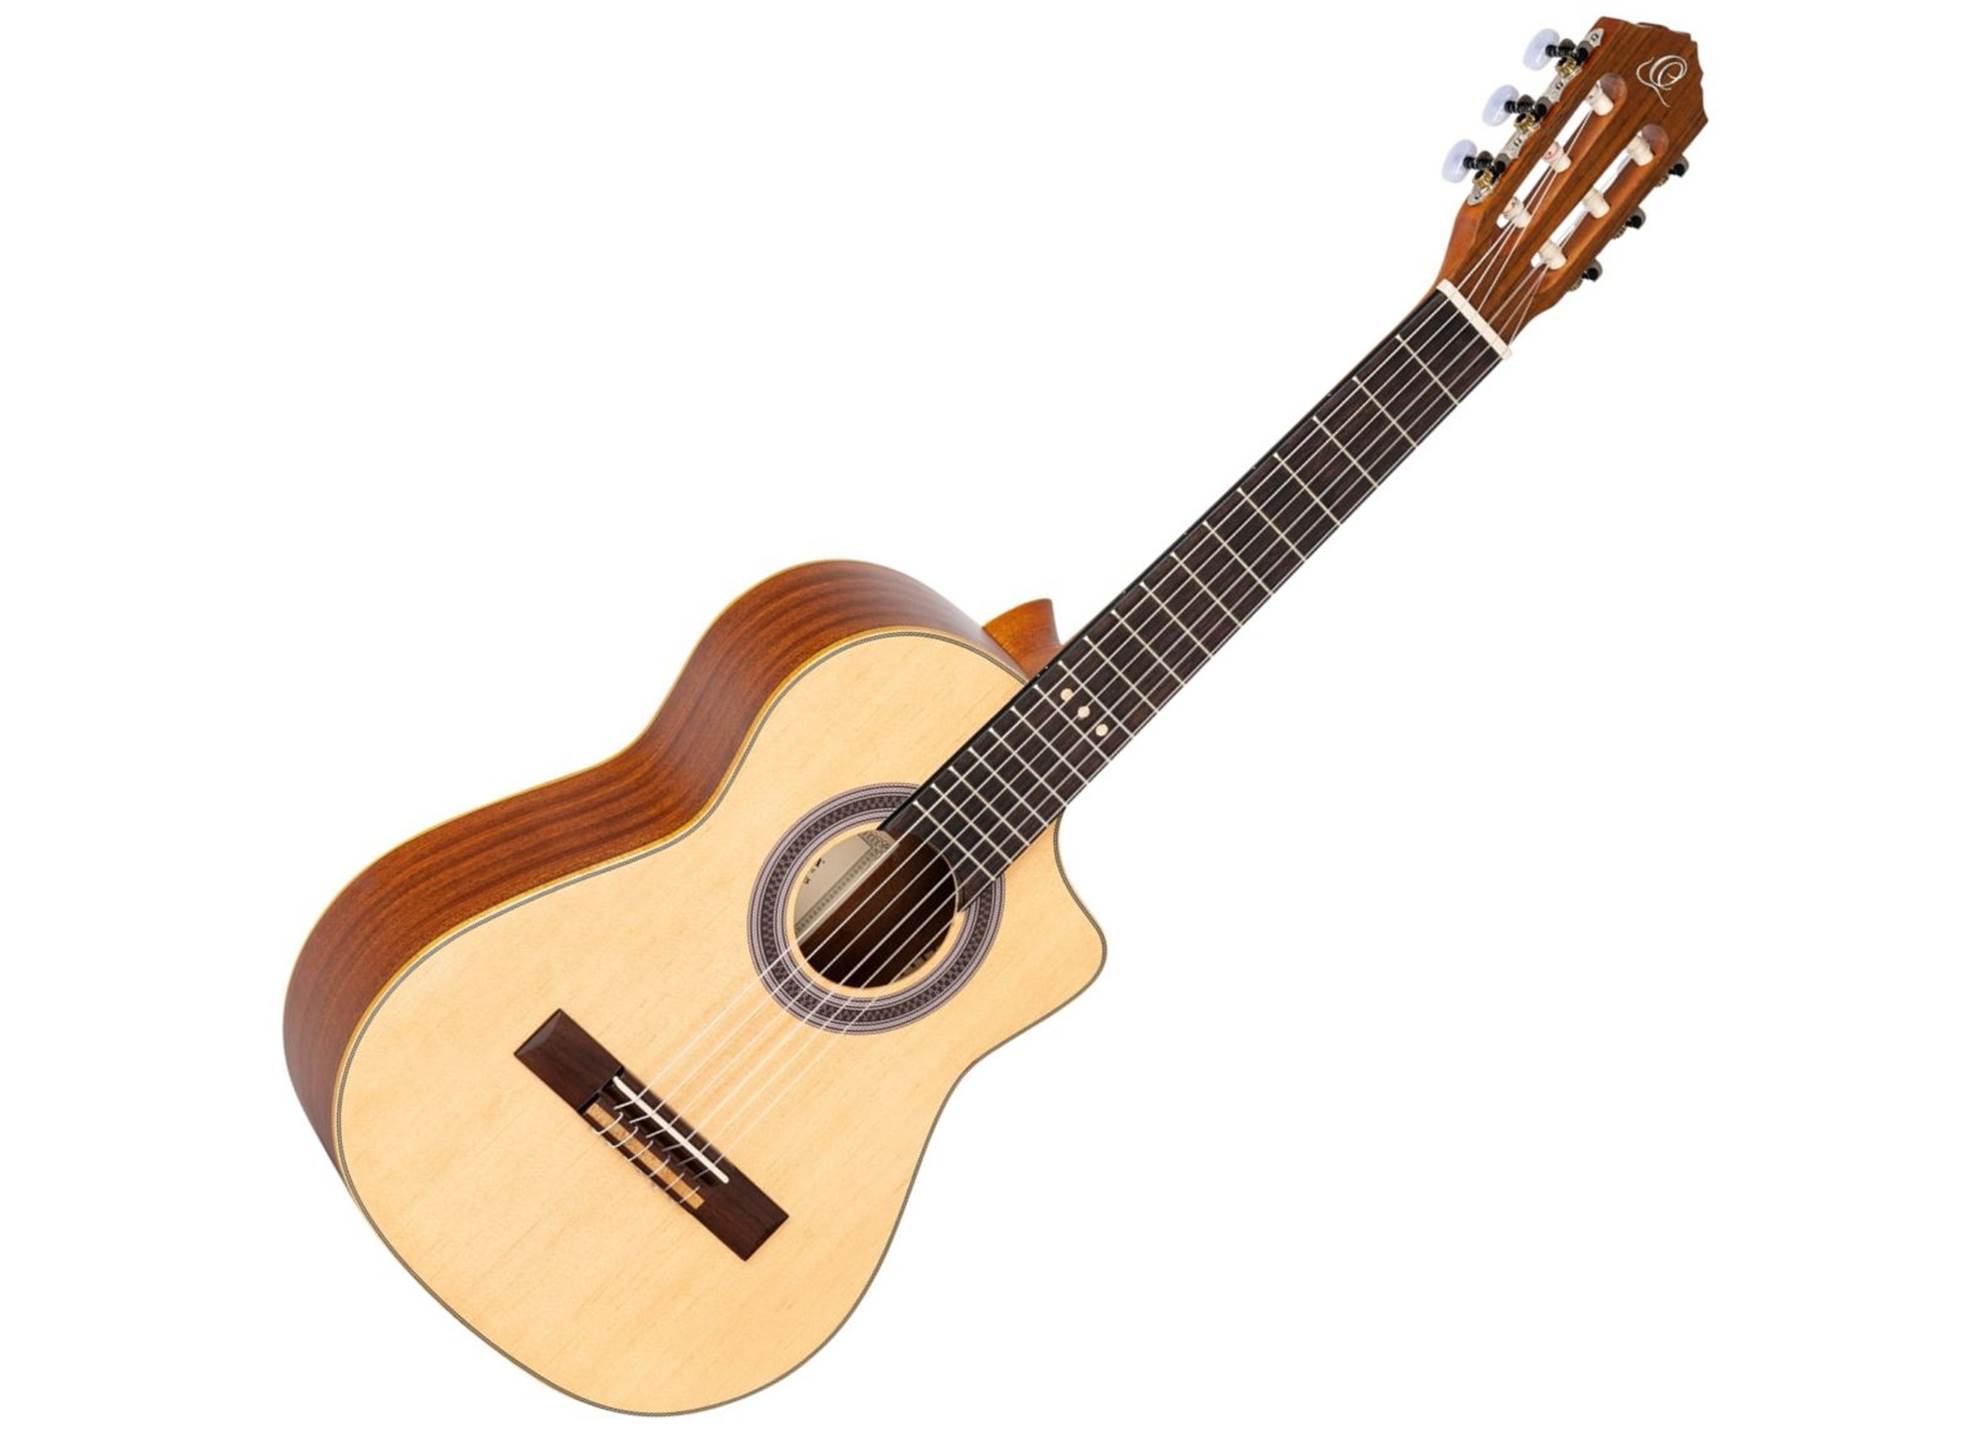 RQ25 Requinto Spruce